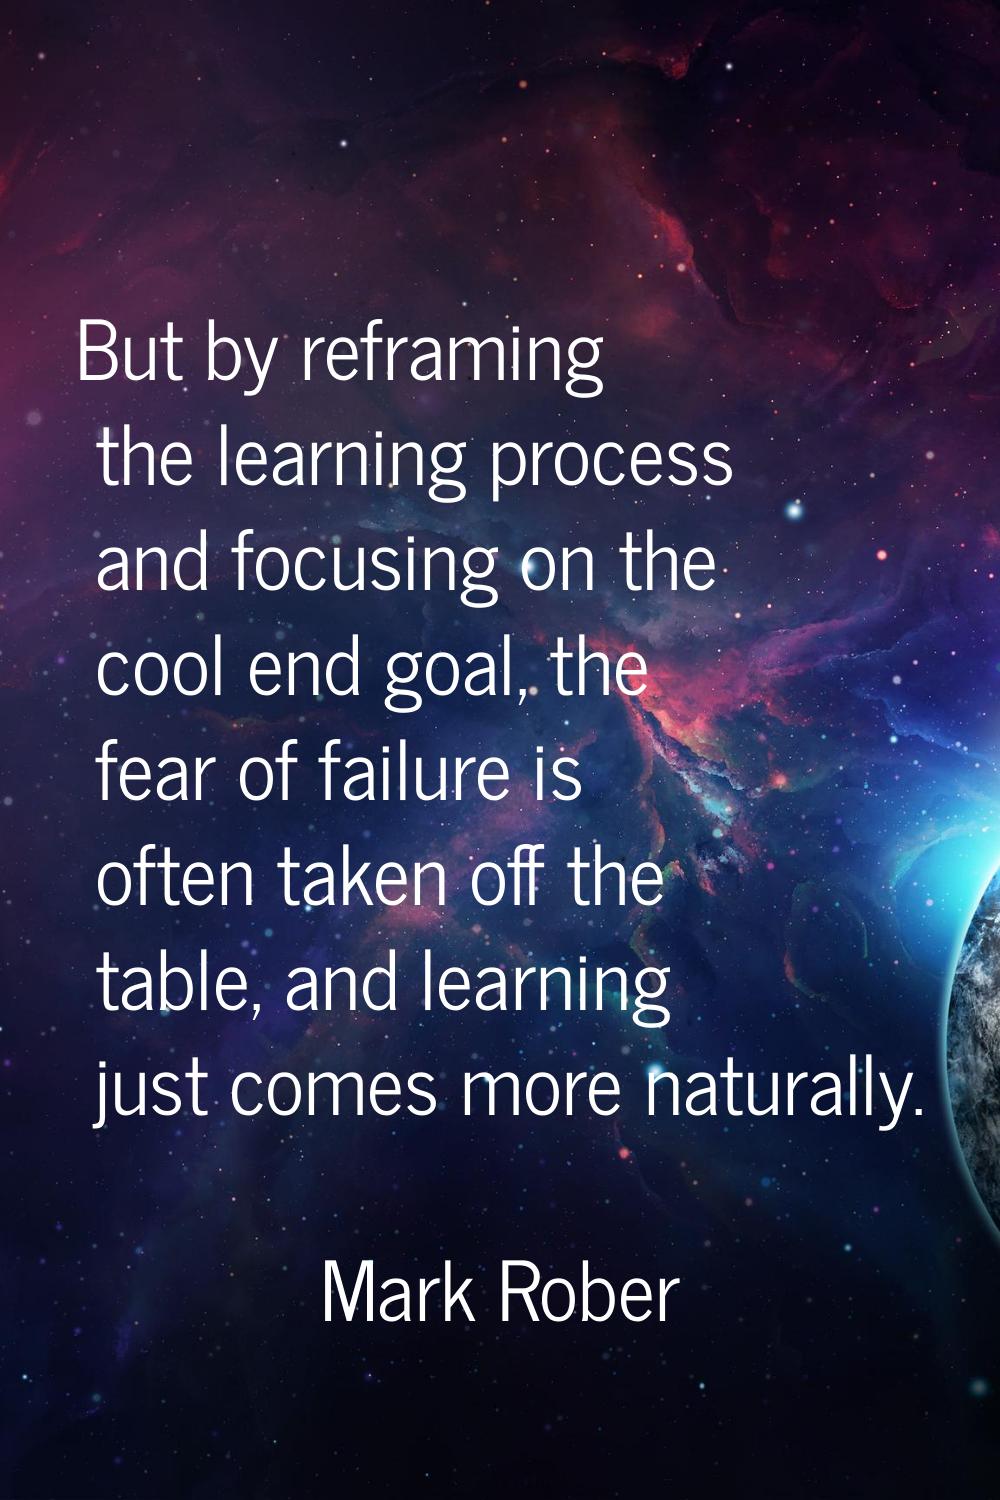 But by reframing the learning process and focusing on the cool end goal, the fear of failure is oft